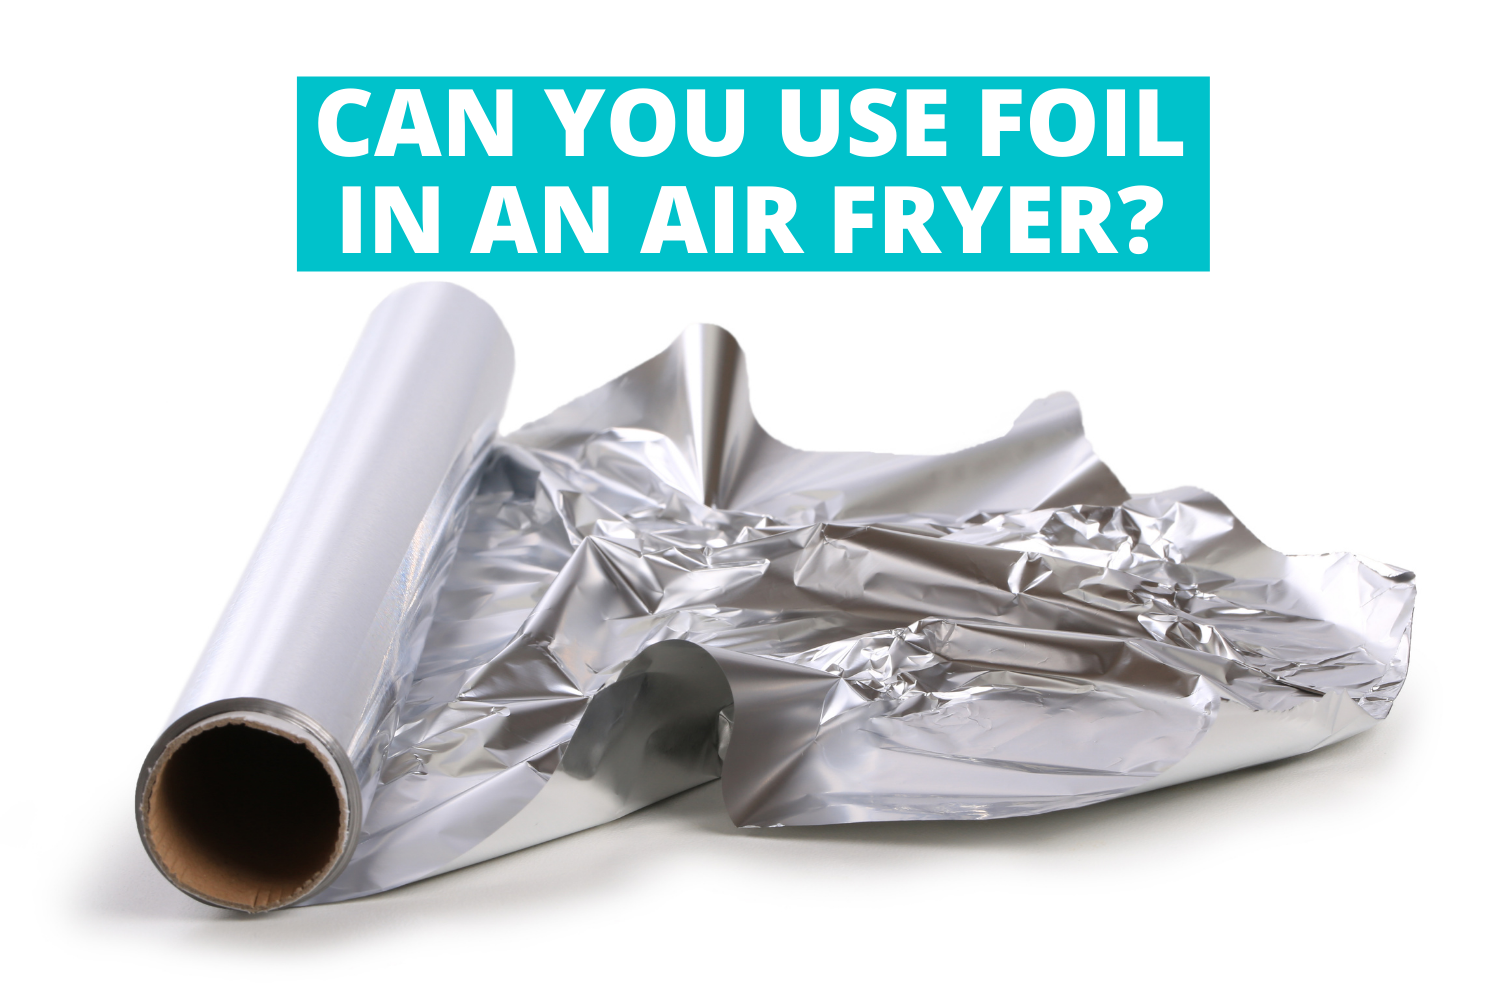 foil roll with text overlay asking the question can you use foil in an air fryer